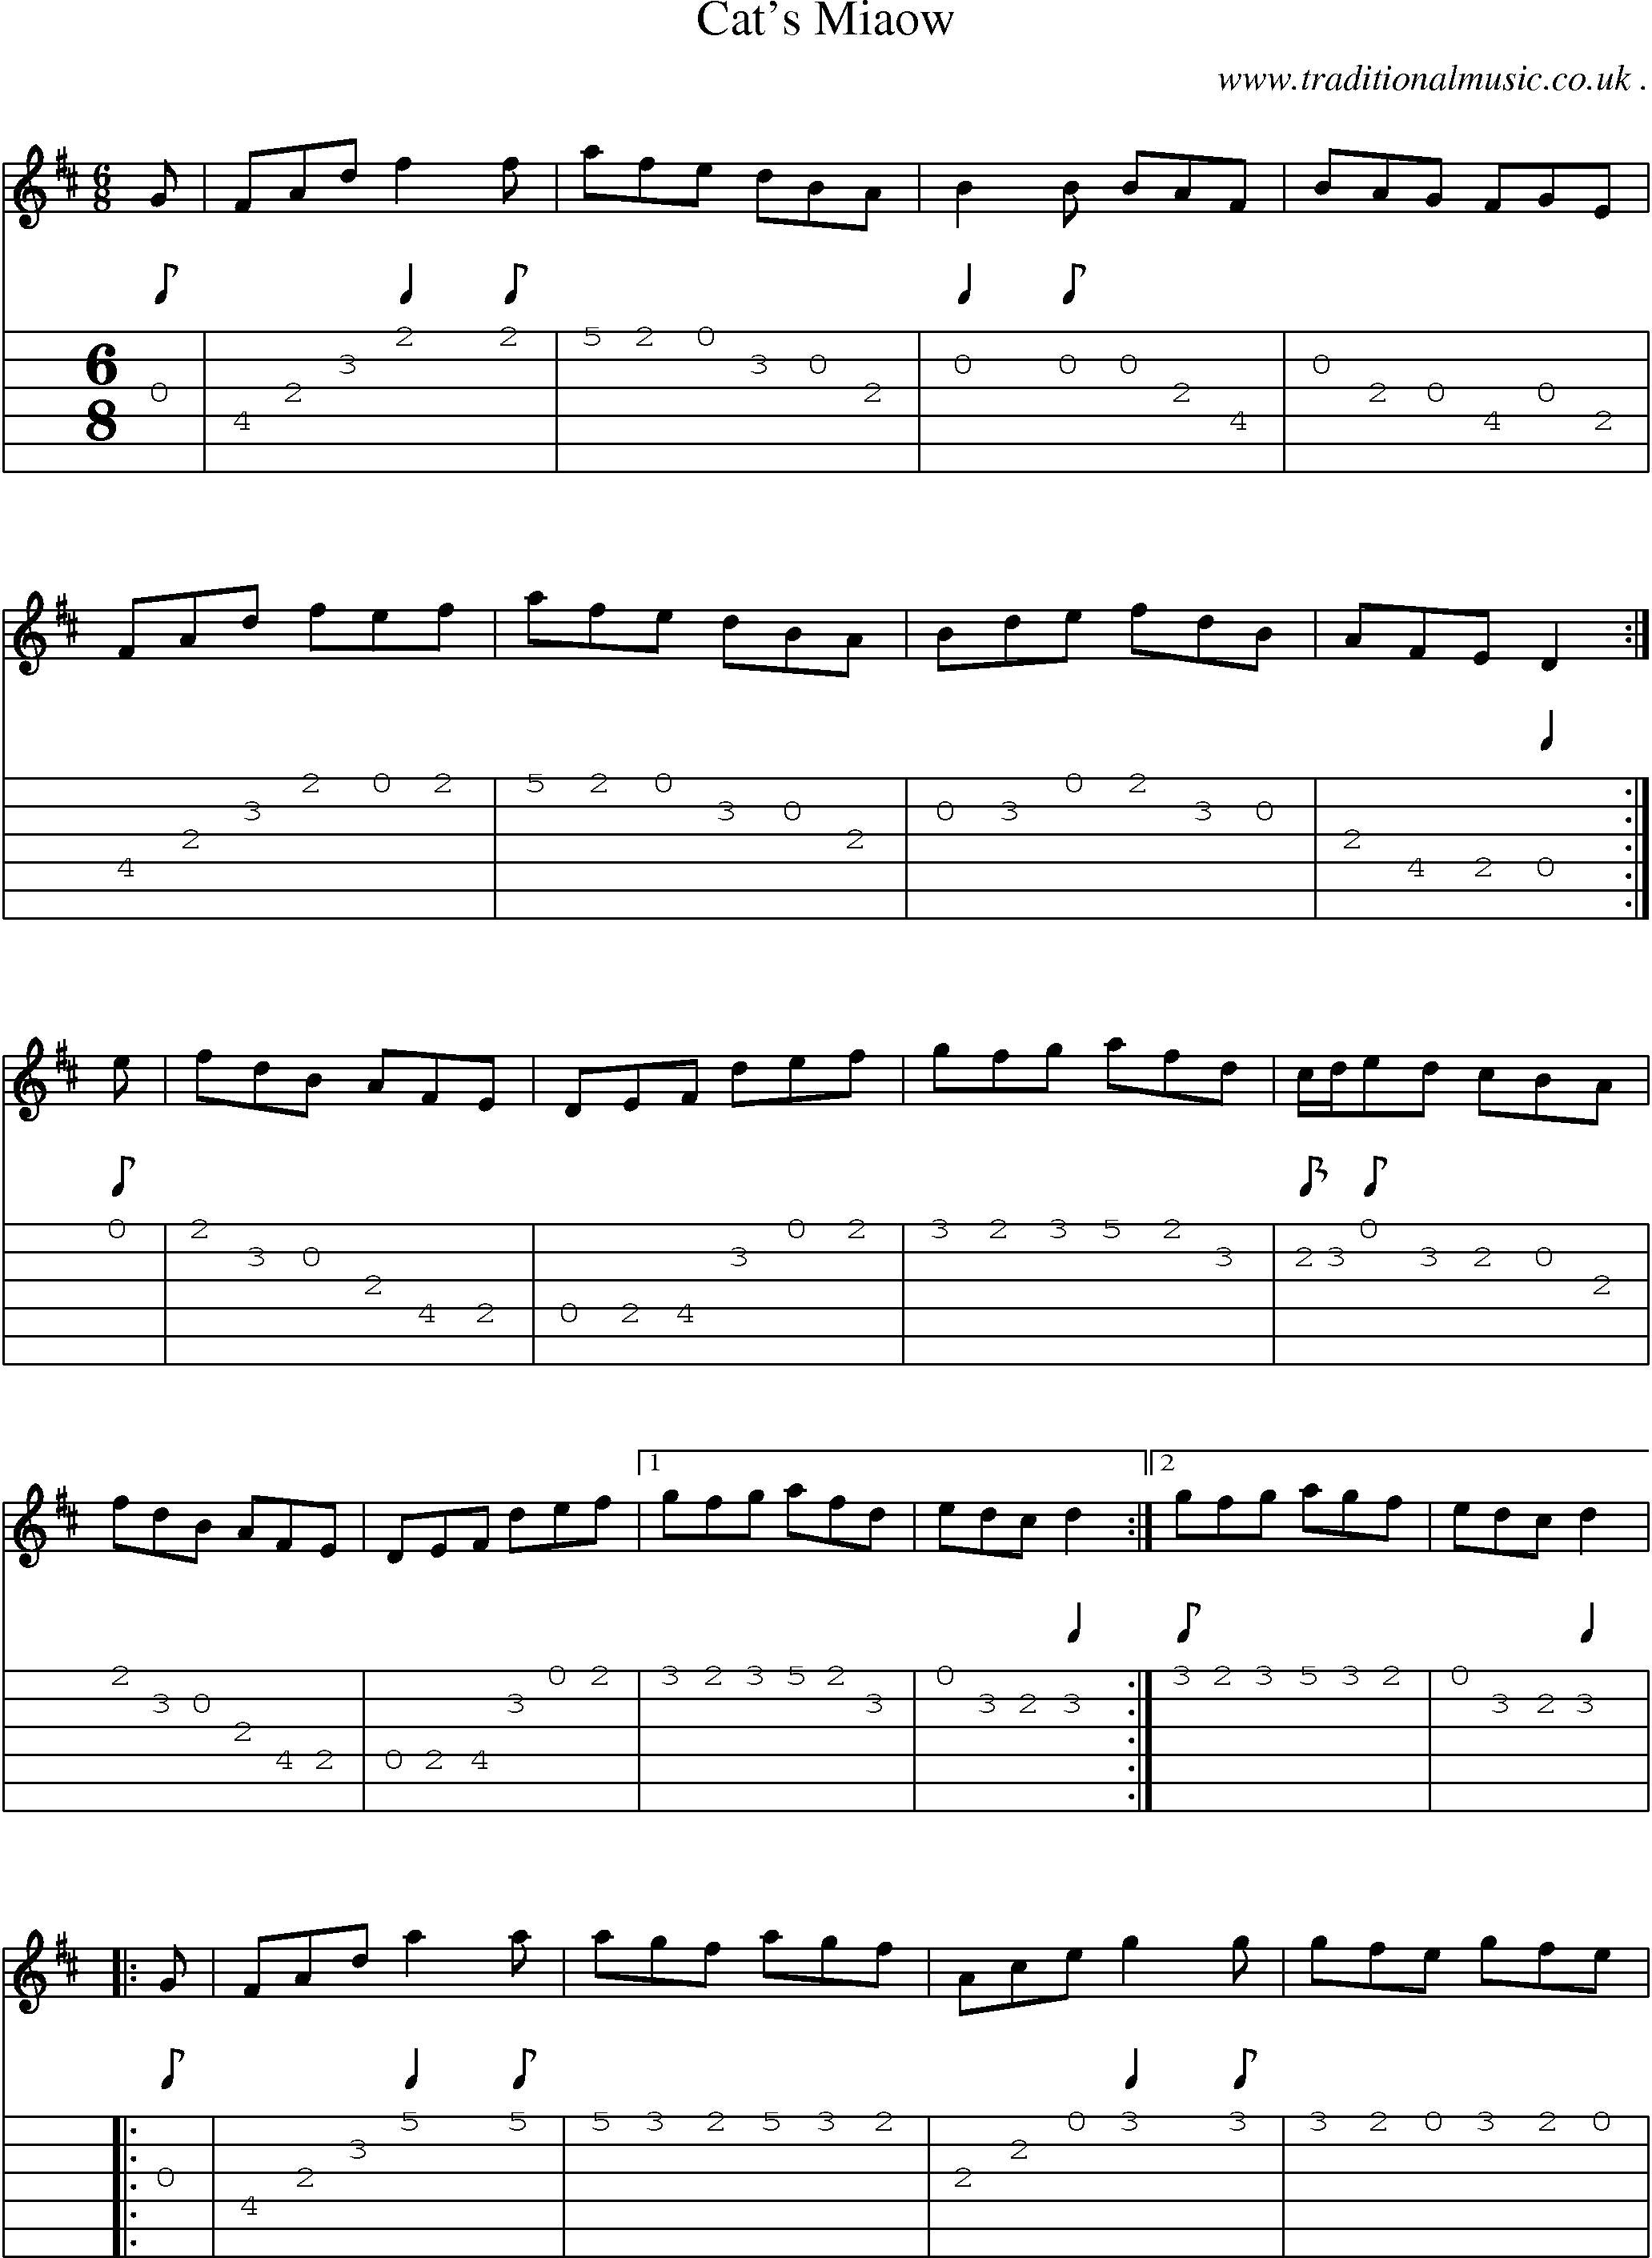 Sheet-Music and Guitar Tabs for Cats Miaow